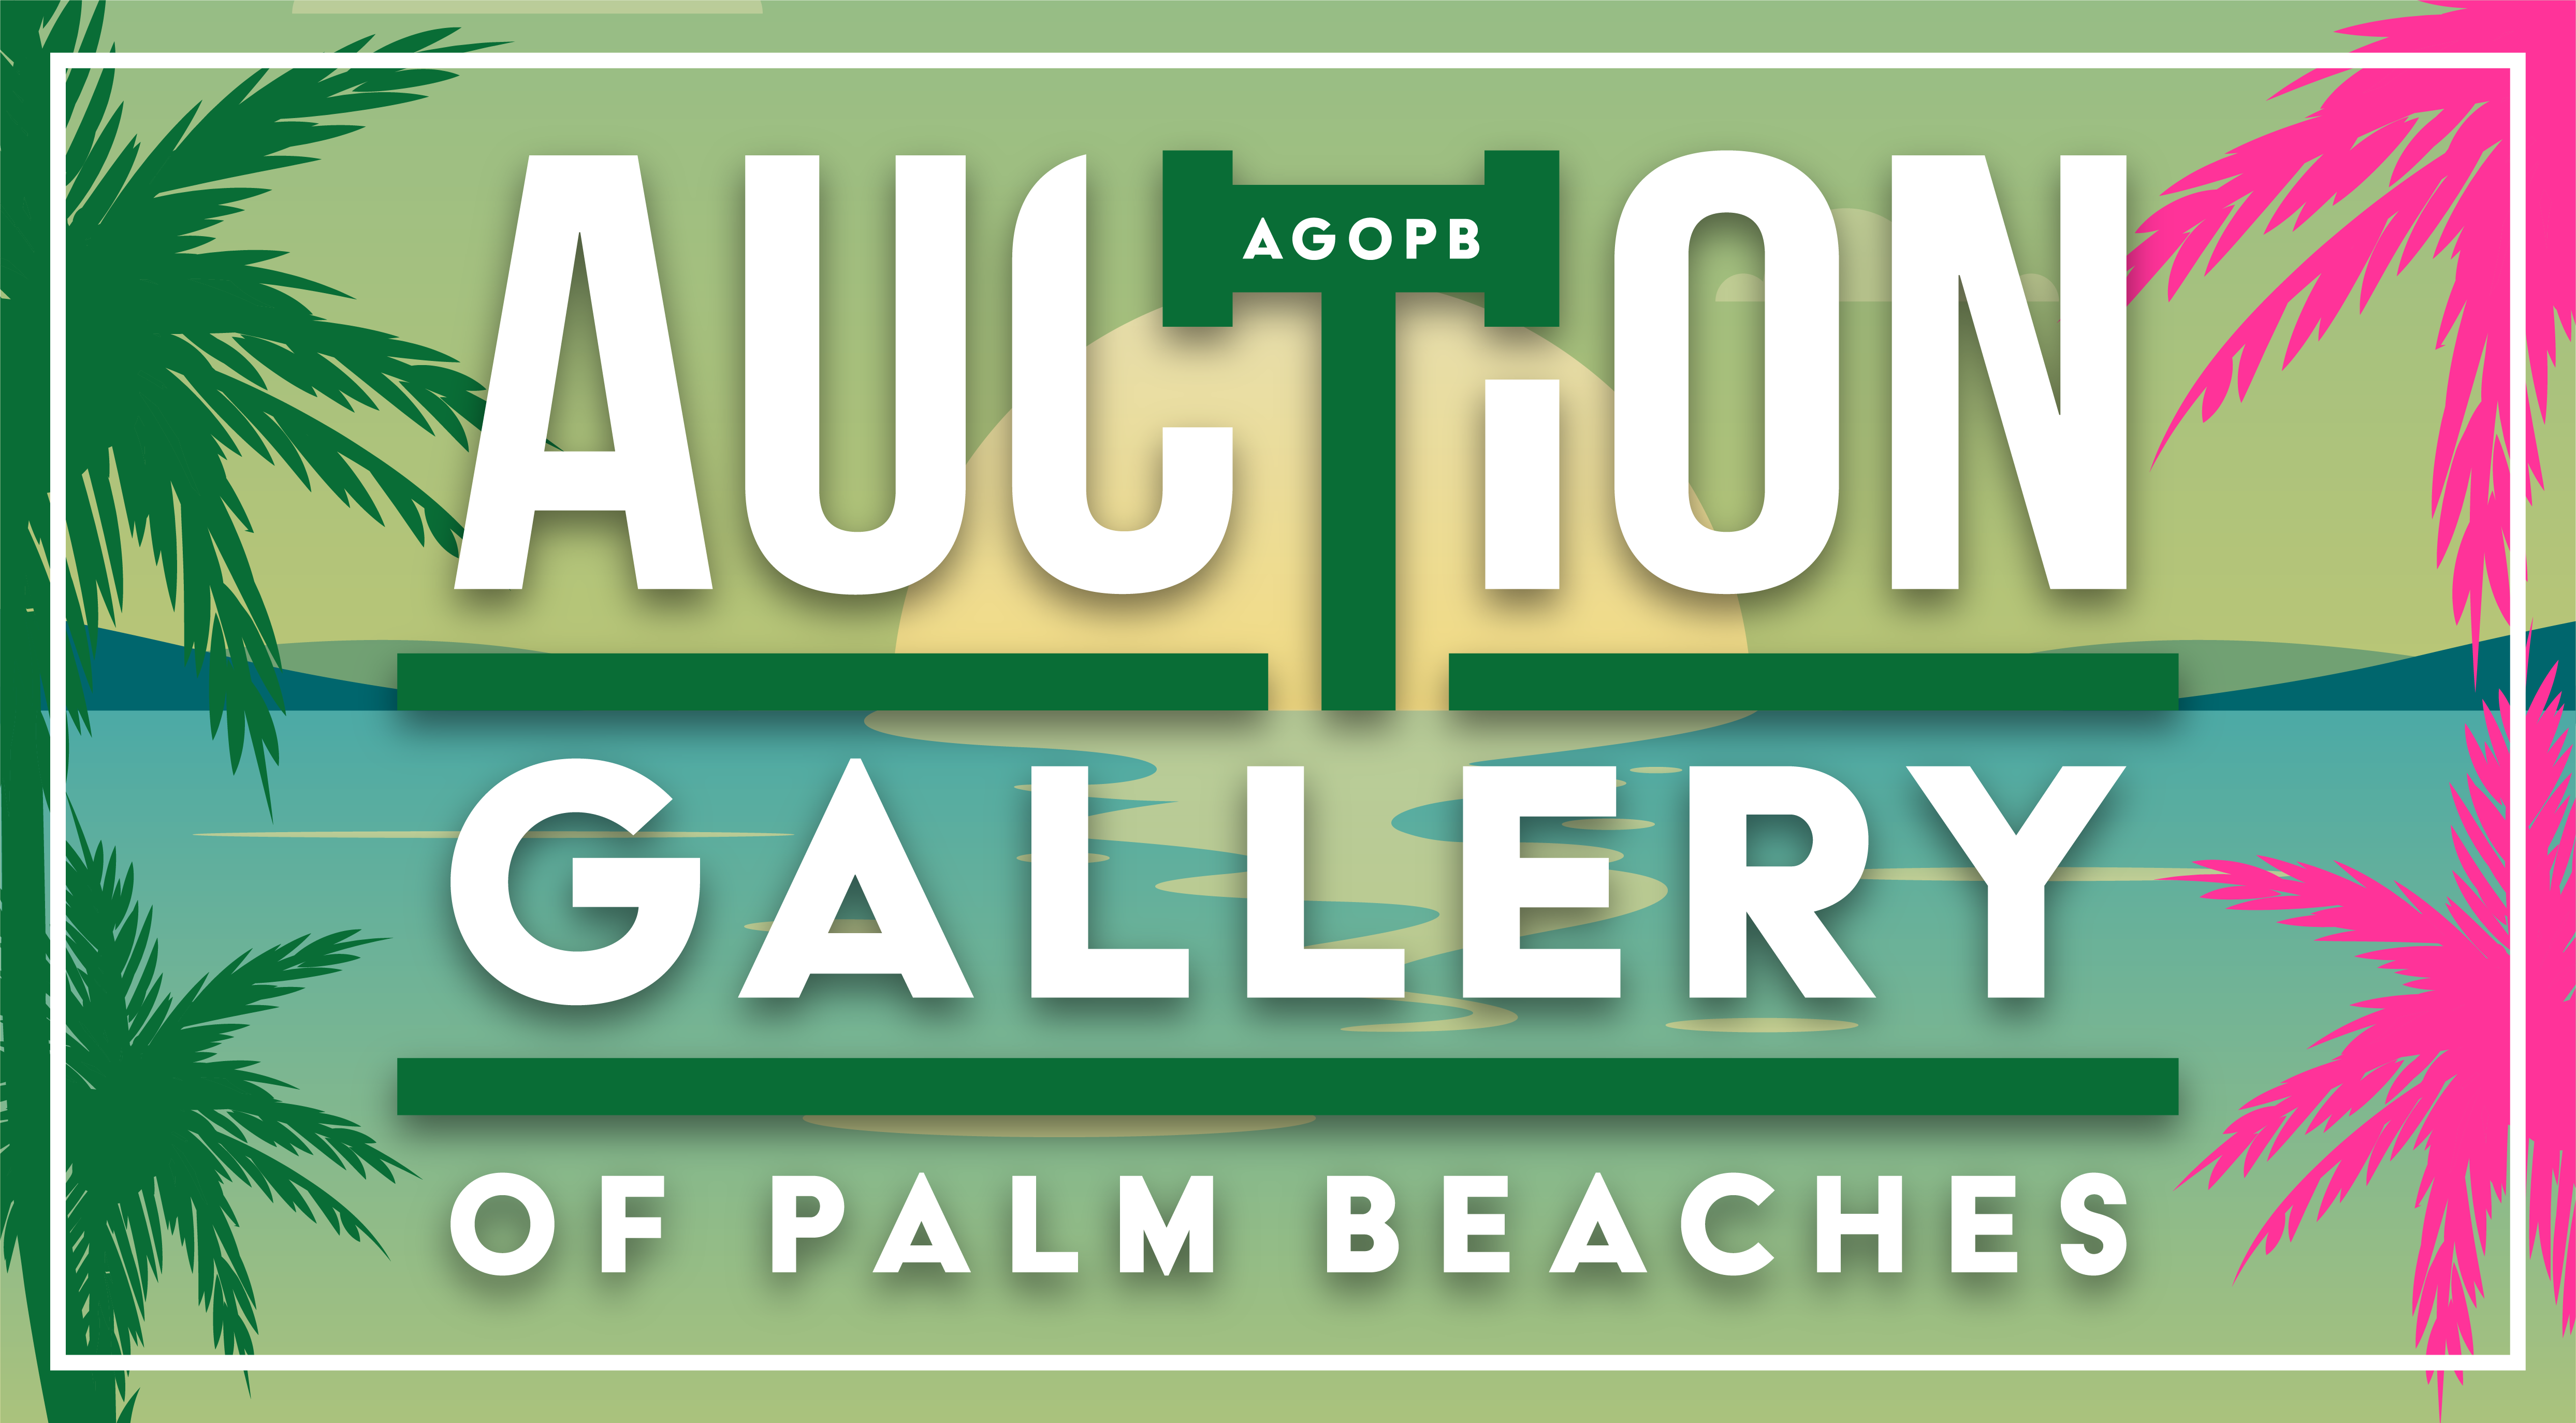 Auction Gallery of the Palm Beaches